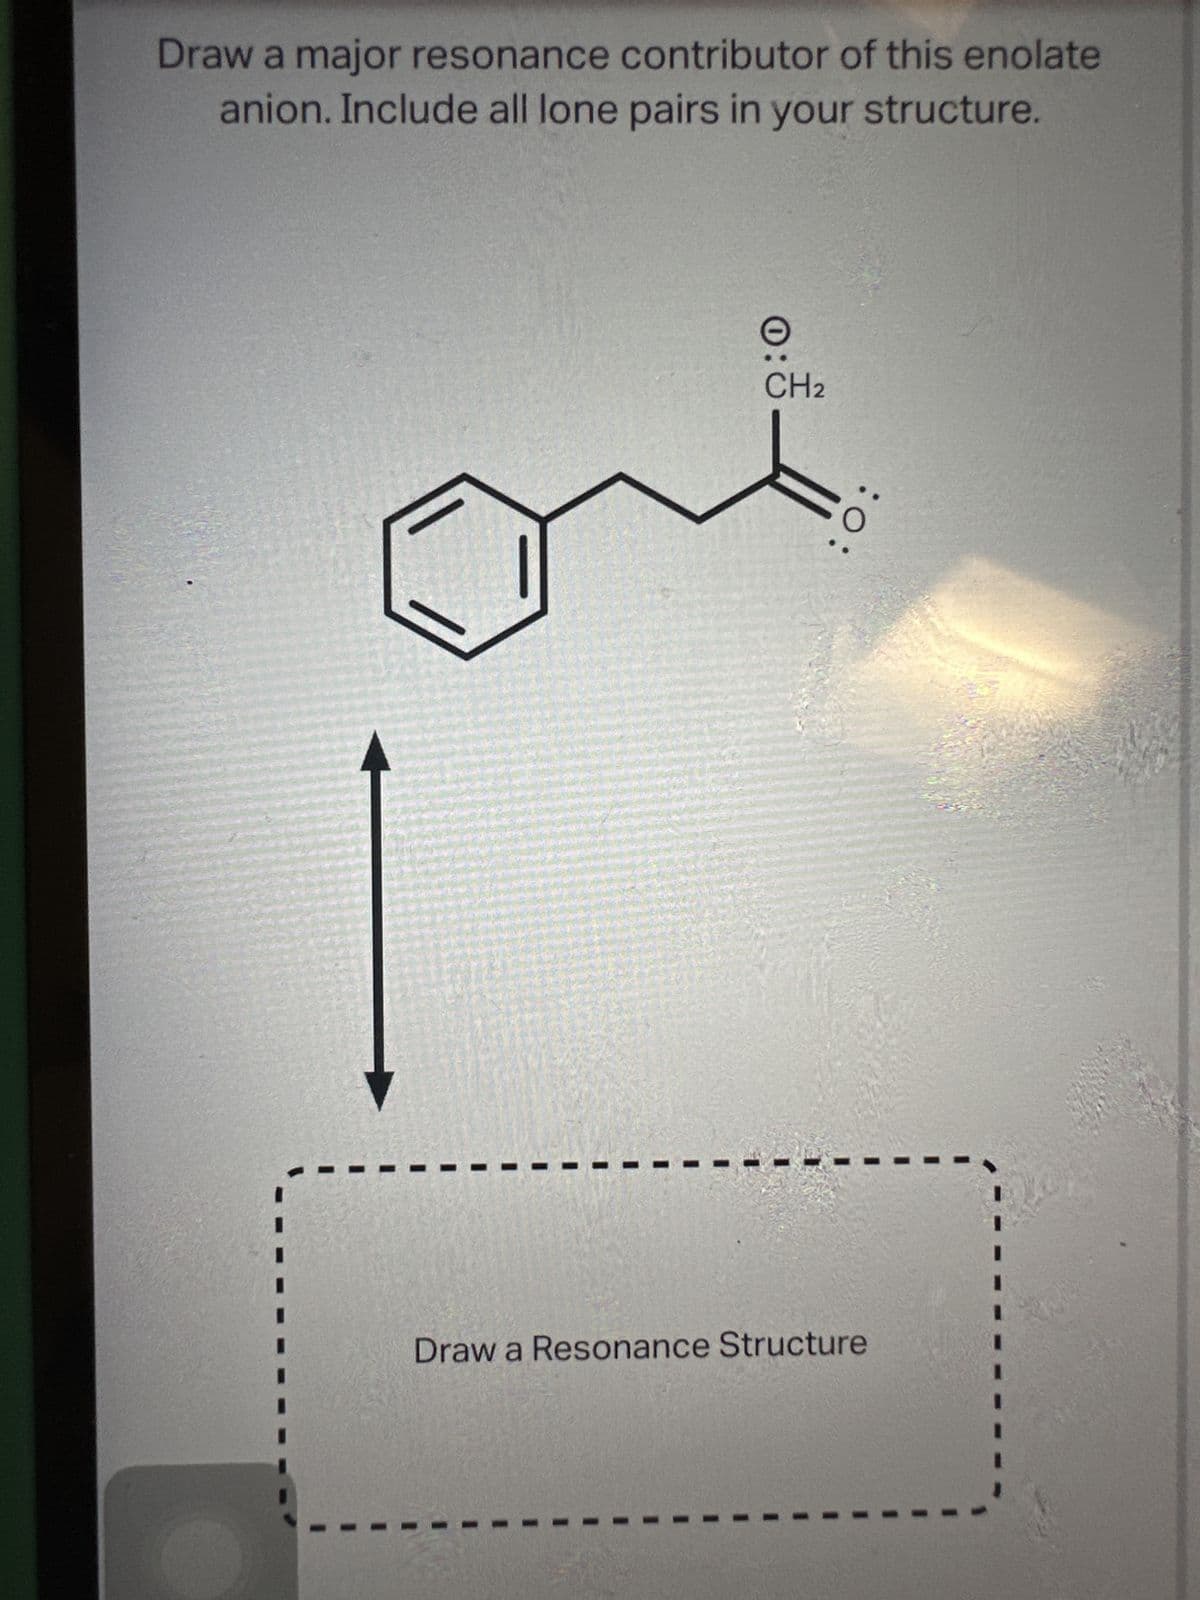 Draw a major resonance contributor of this enolate
anion. Include all lone pairs in your structure.
0:
CH2
:0:
CO
Draw a Resonance Structure